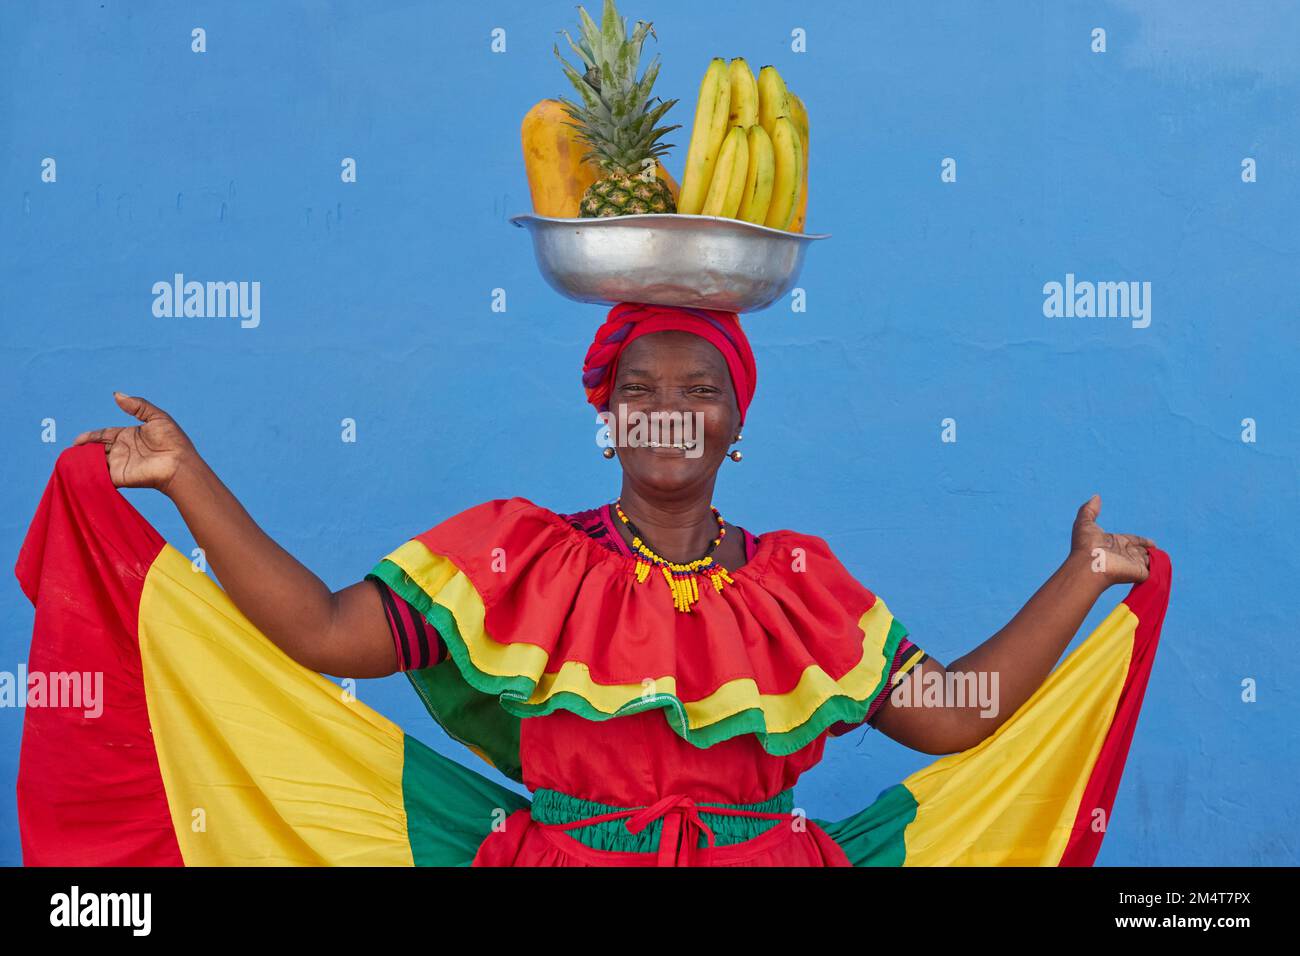 A regular footage of a Palenquera holding a big bowl of fruits above head, dressed with colorful clothes on a blue background in Cartagena, Spain Stock Photo